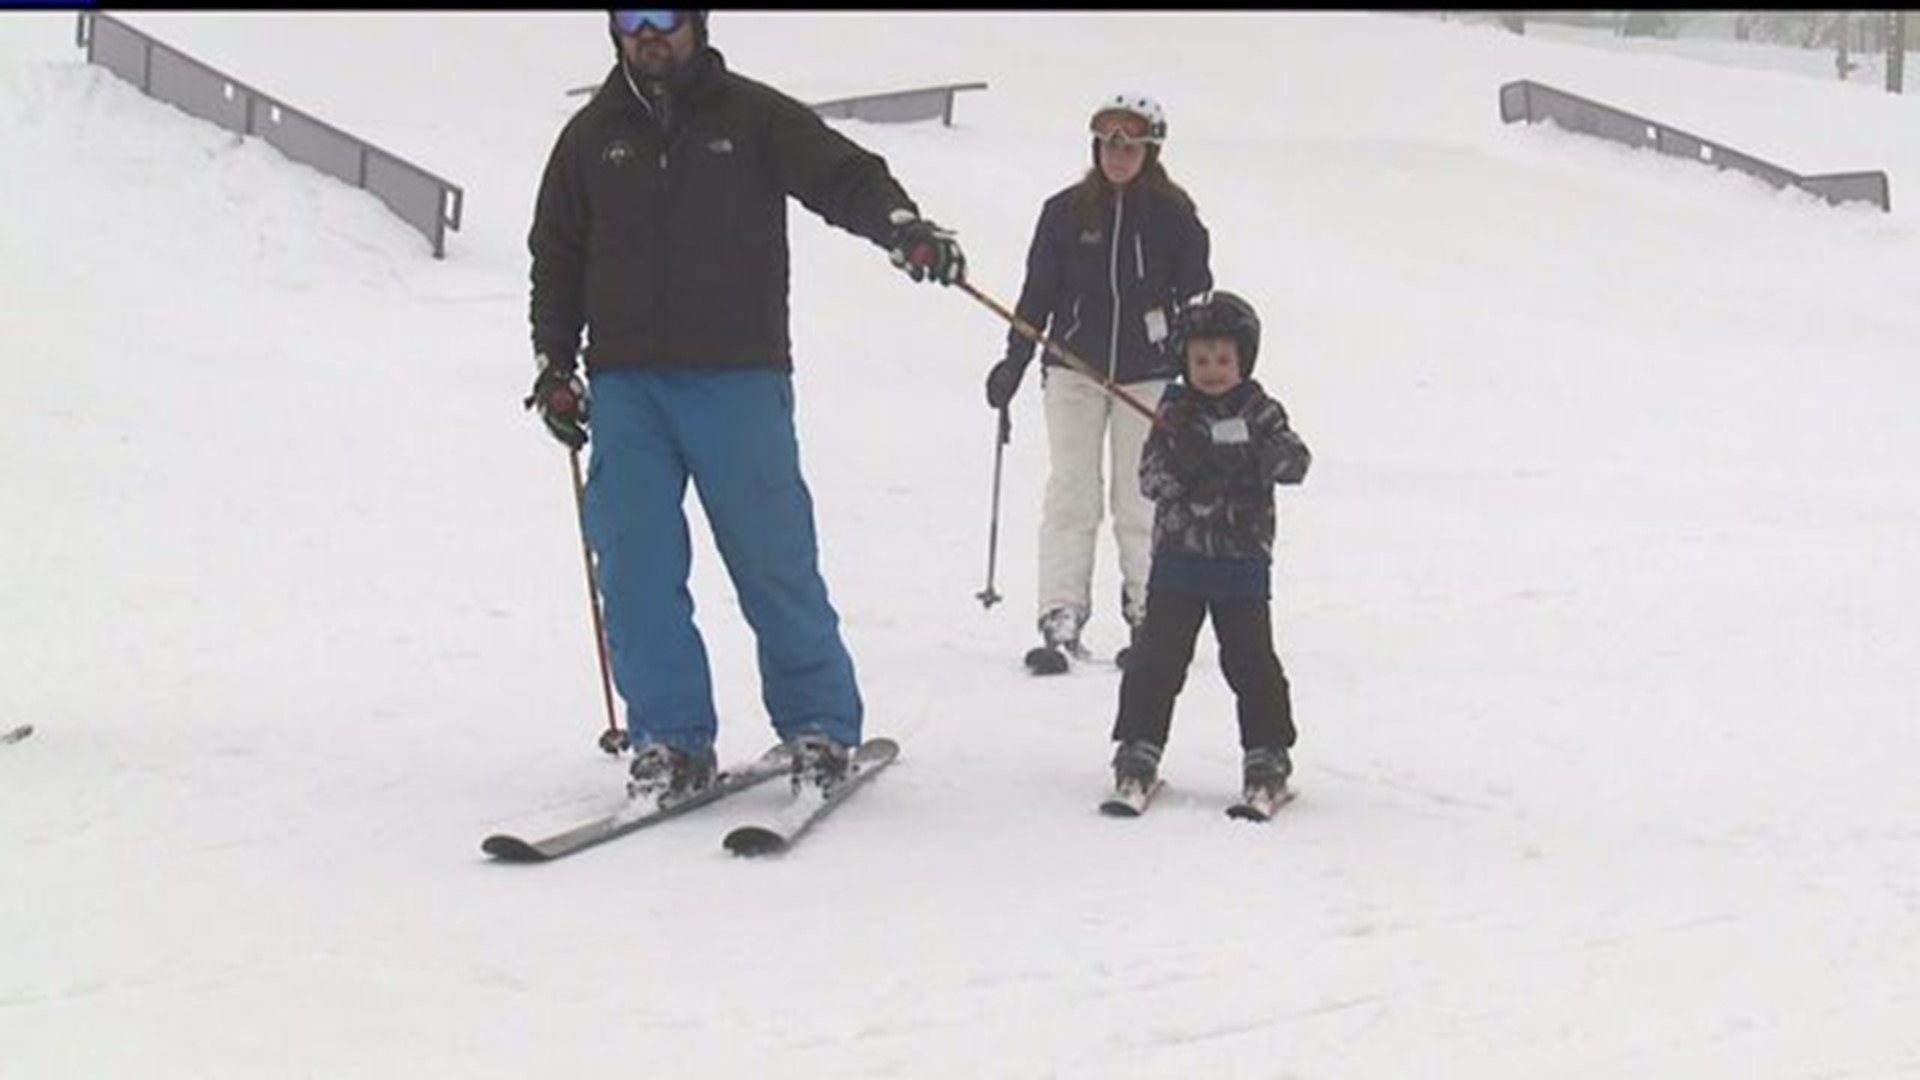 Last day of the season at Ski Roundtop in York County